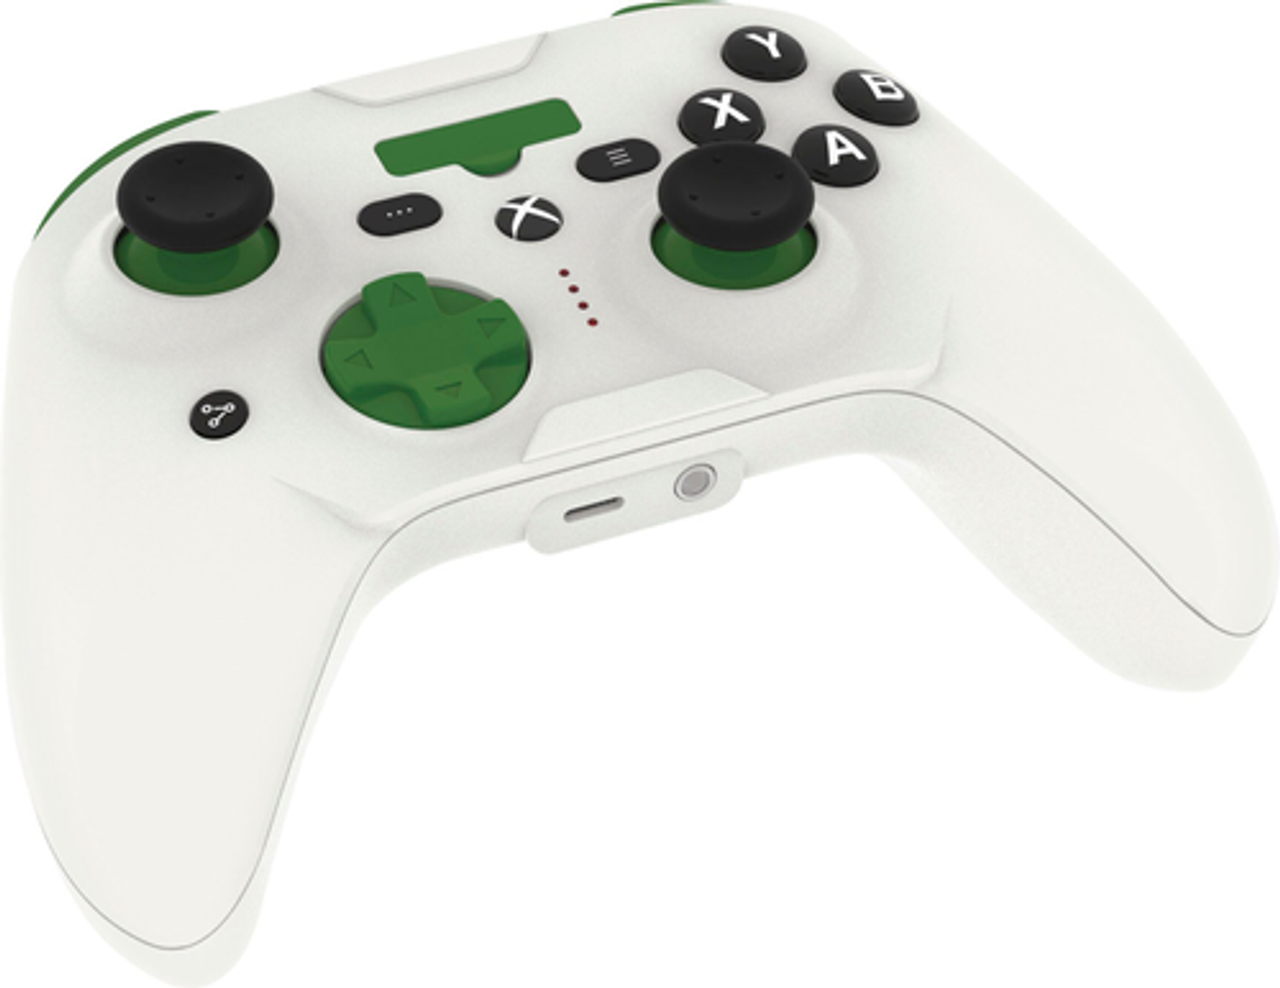 Rotor Riot - Cloud Game Controller for iOS (Xbox Edition) - White